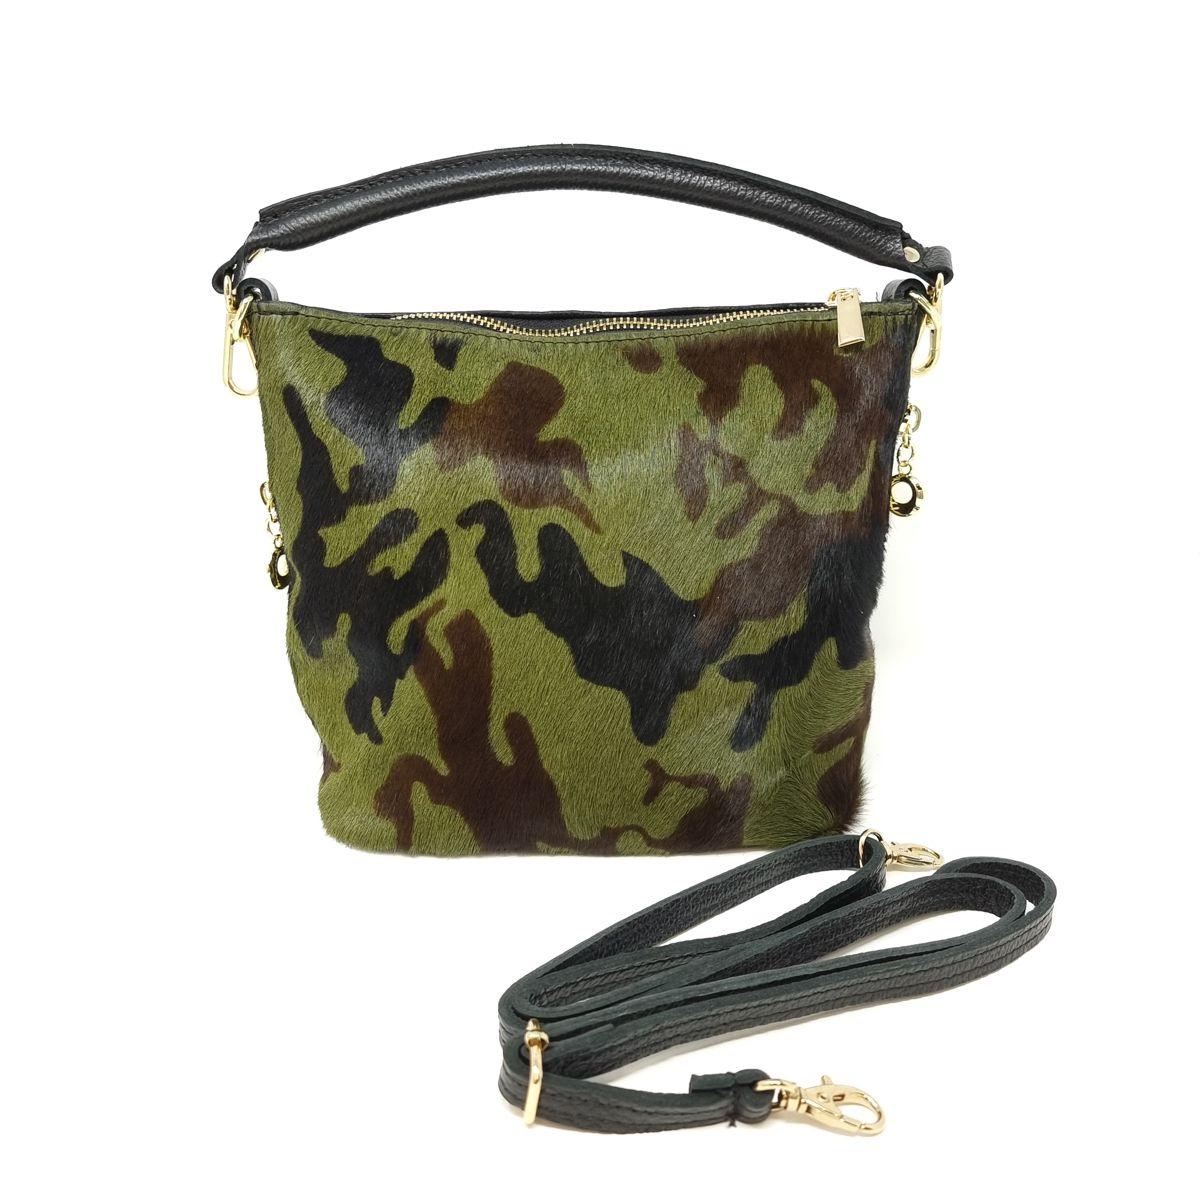 Kevin's Ladies Mid Size Calf Hair Leather Hand Bag-Women's Accessories-Camo-Kevin's Fine Outdoor Gear & Apparel